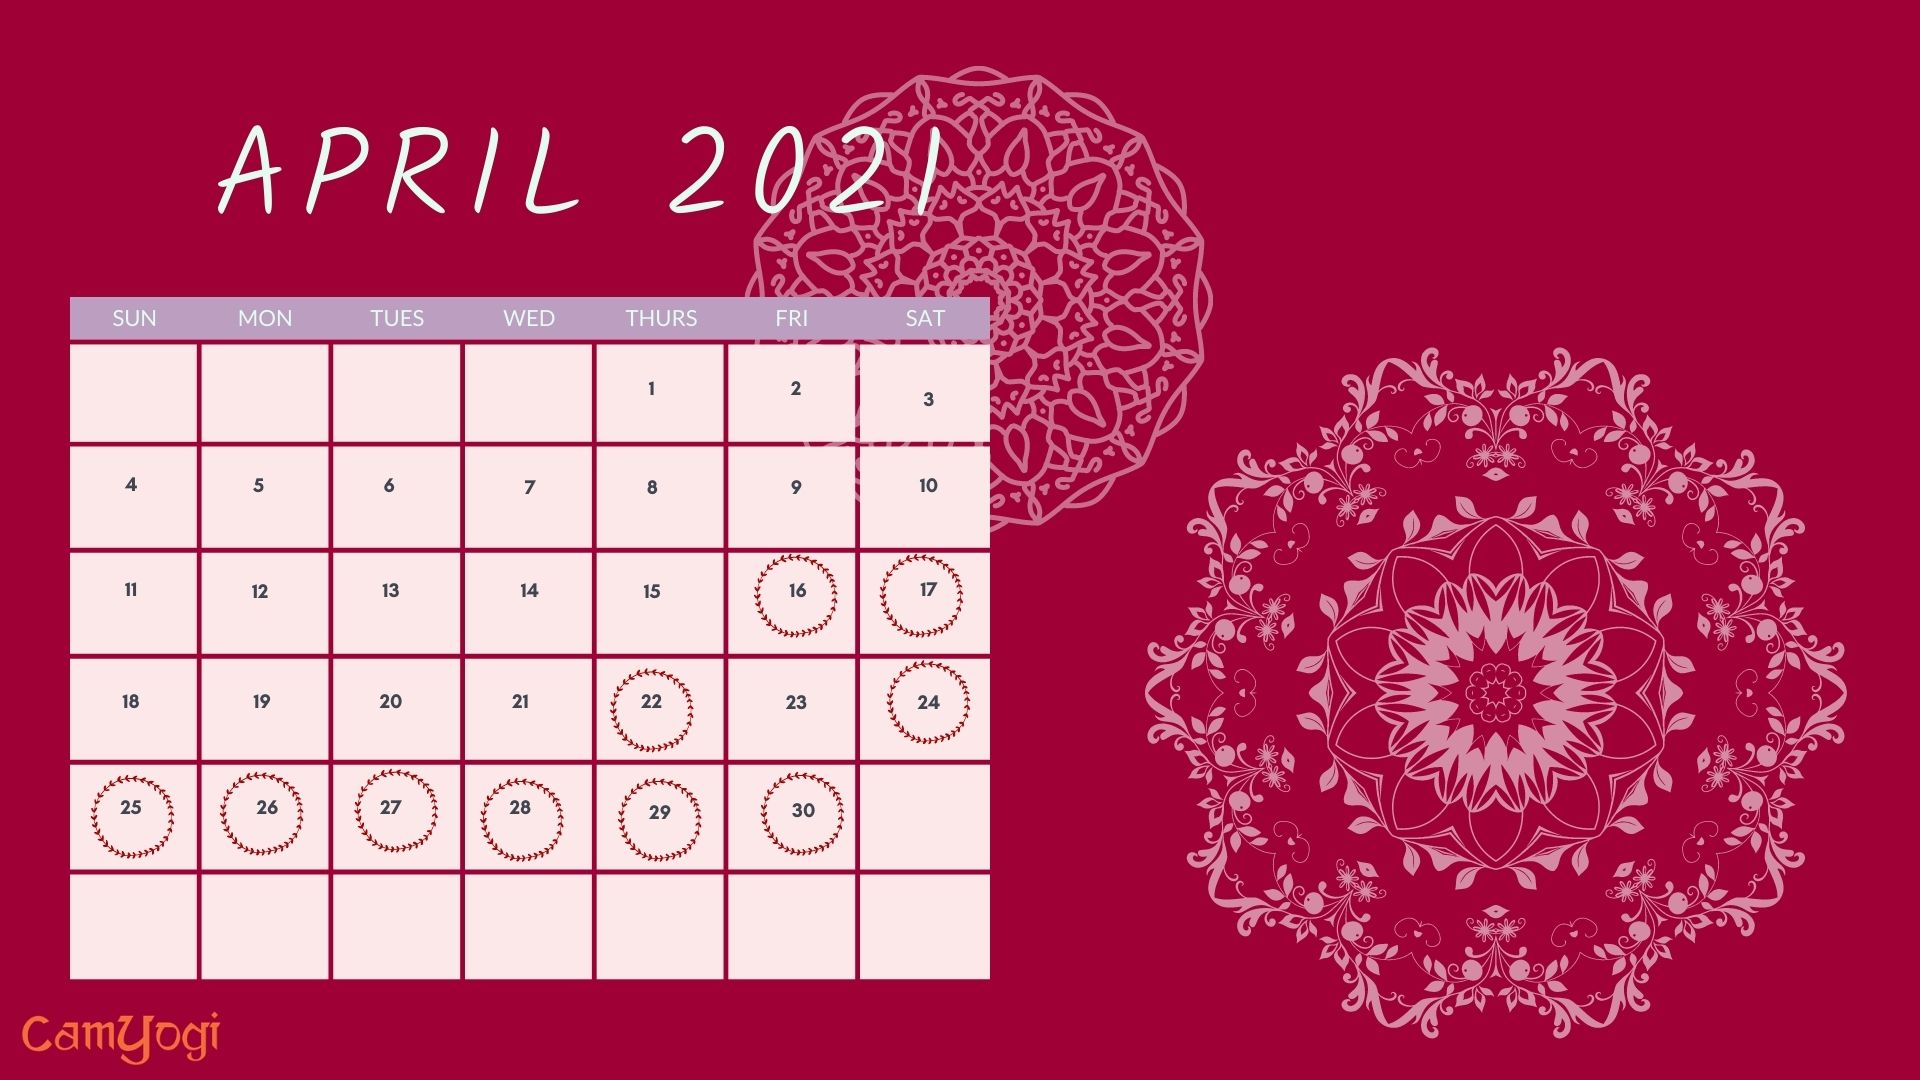 marriage dates in 2021- April